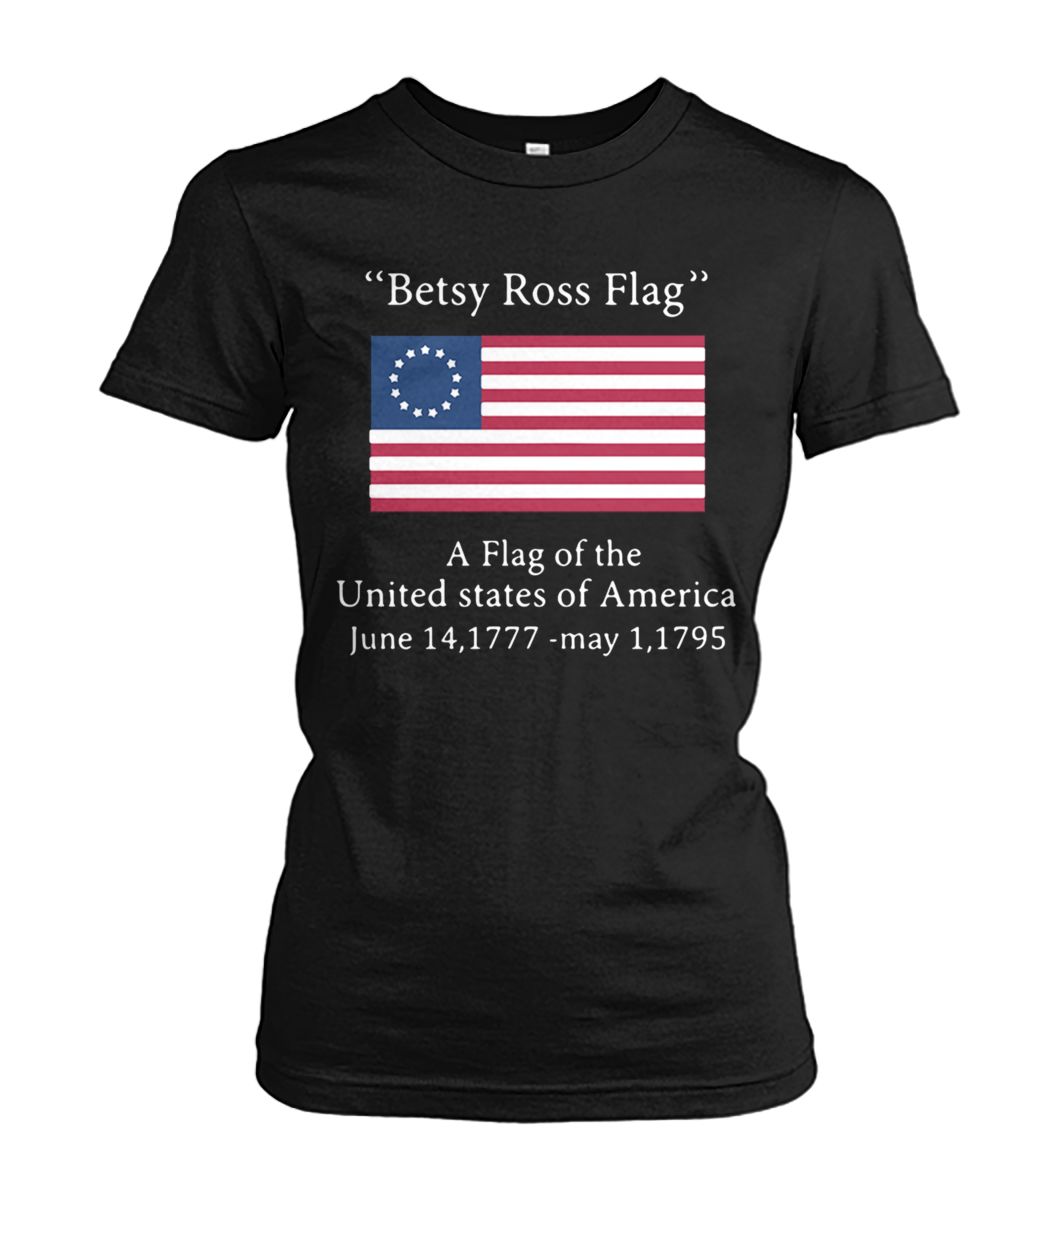 Betsy ross flag a flag of the united states of america women's crew tee